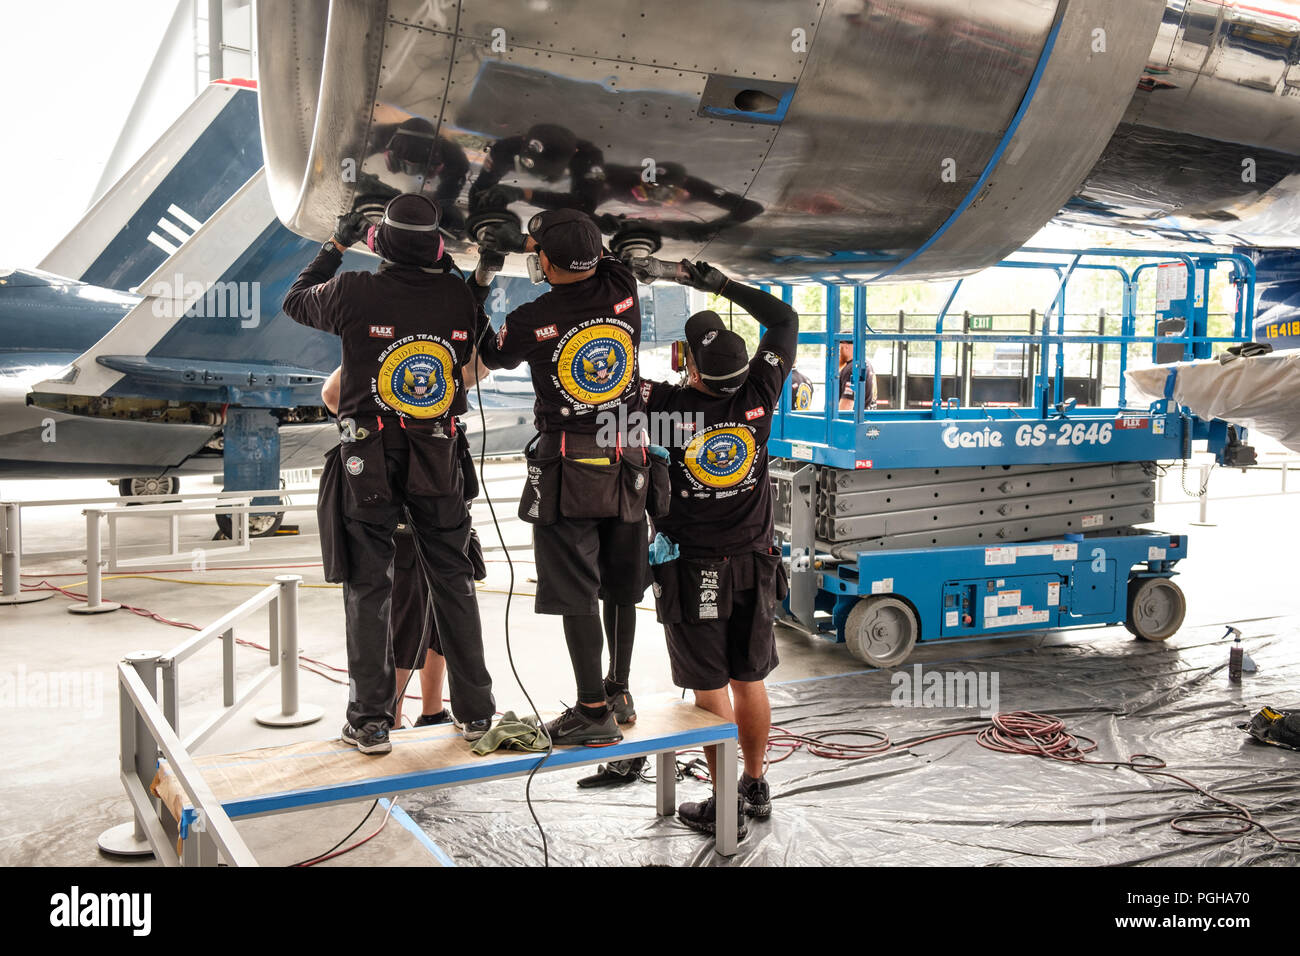 Air Force One Detailing Team working in Aviation Pavilion of Museum of Flight, Seattle, USA Stock Photo